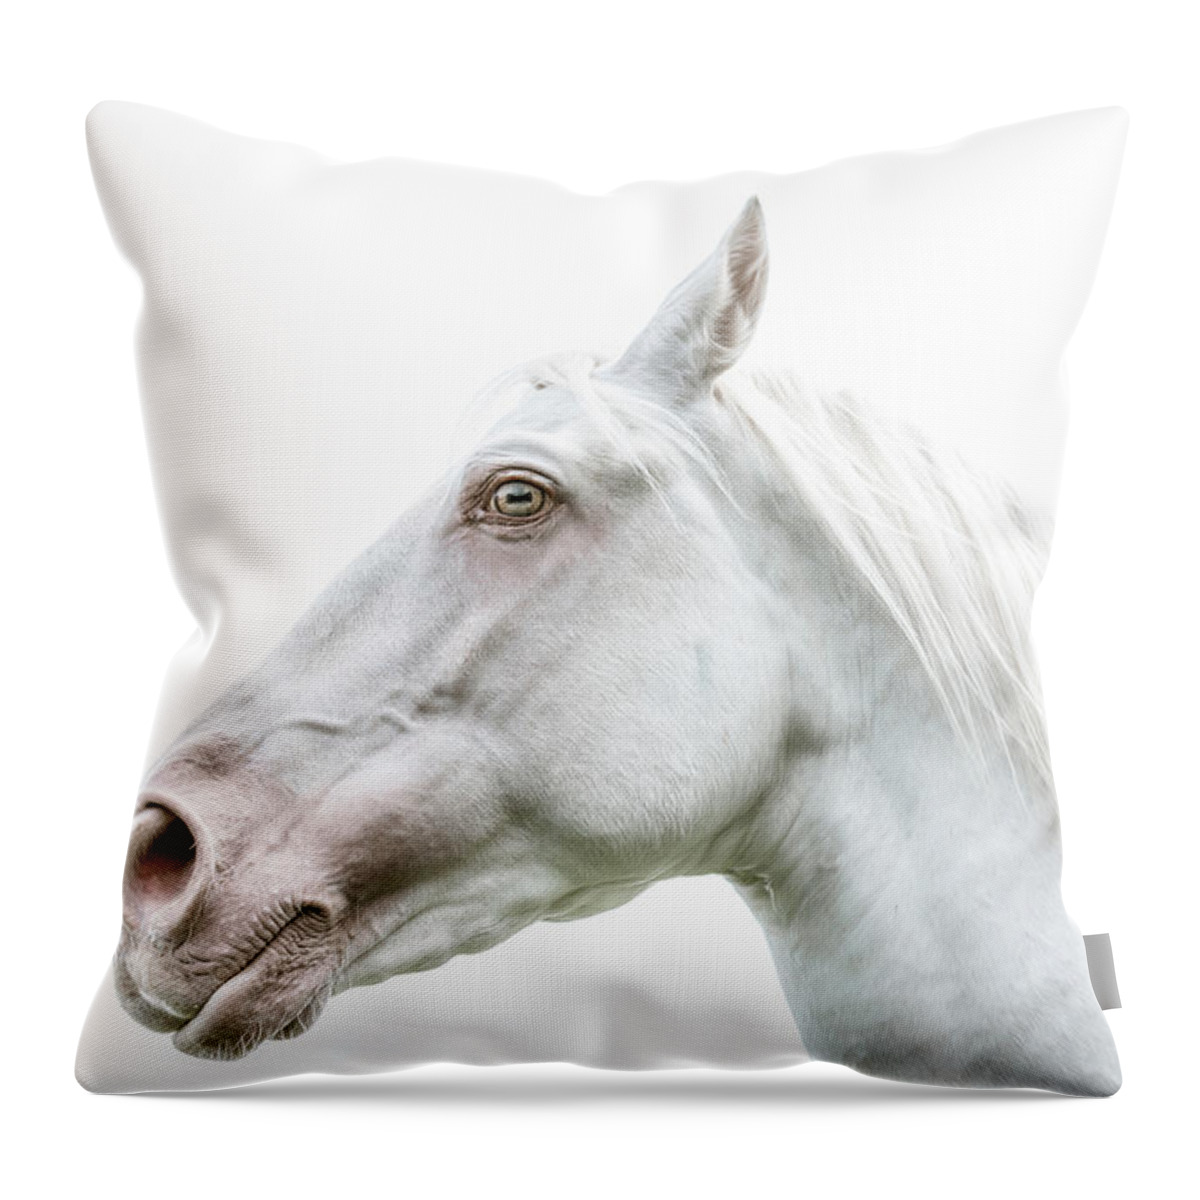 Photographs Throw Pillow featuring the photograph Thinking - Horse Art by Lisa Saint